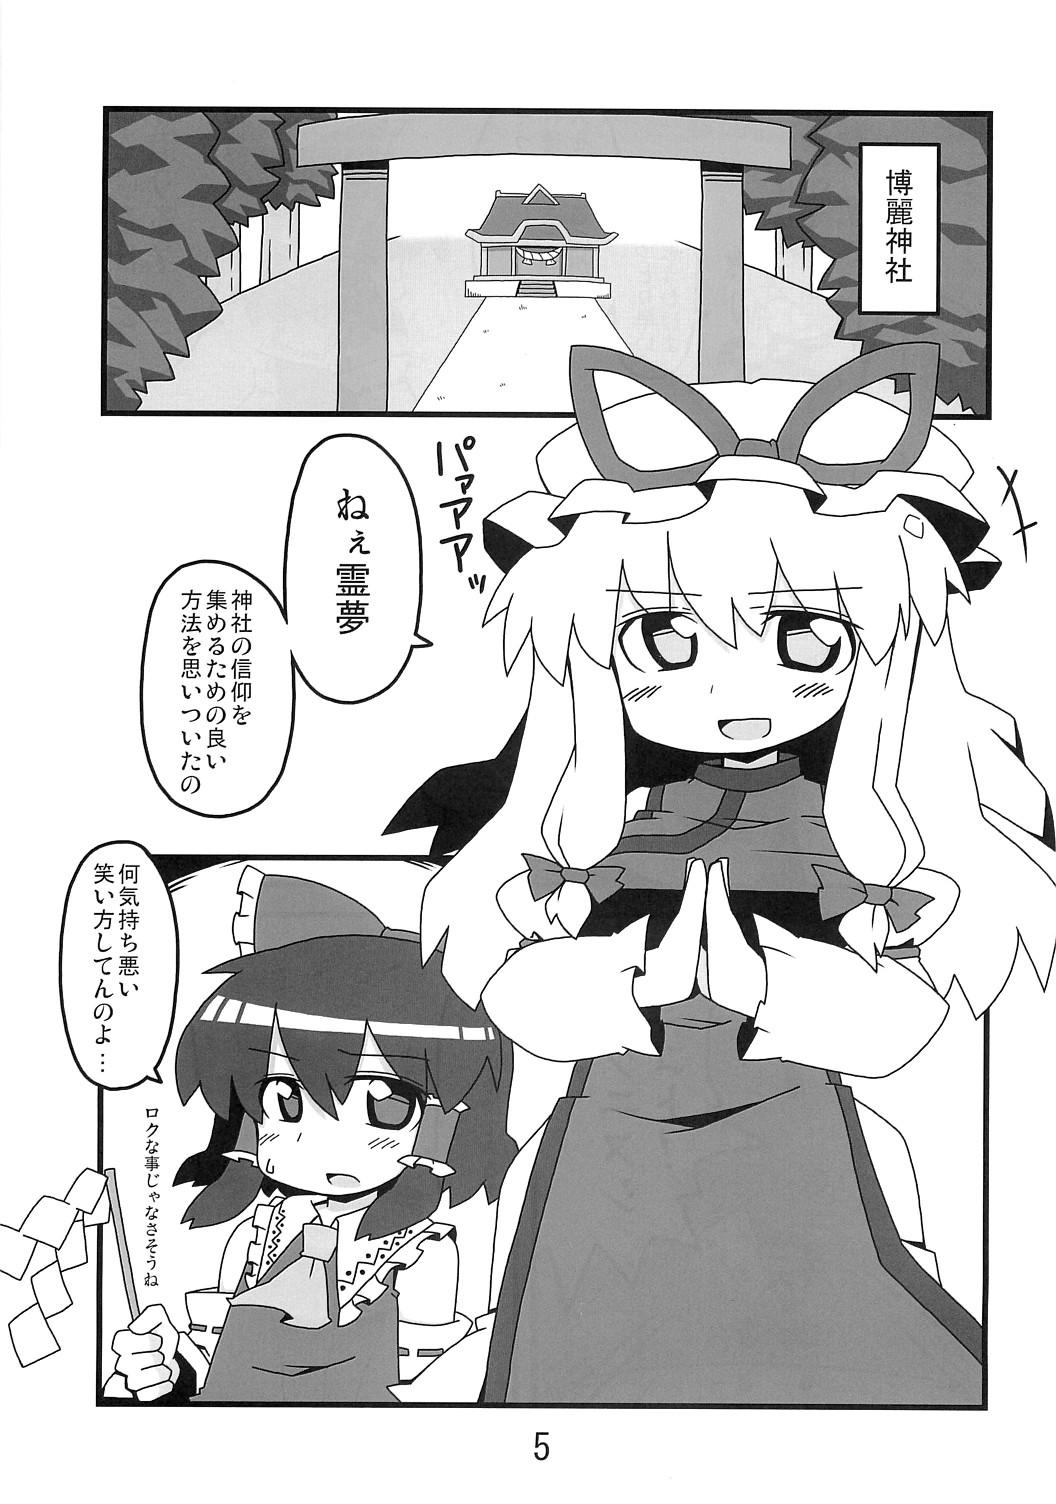 Tan 東方豊年祭 - Touhou project Amateurporn - Page 4